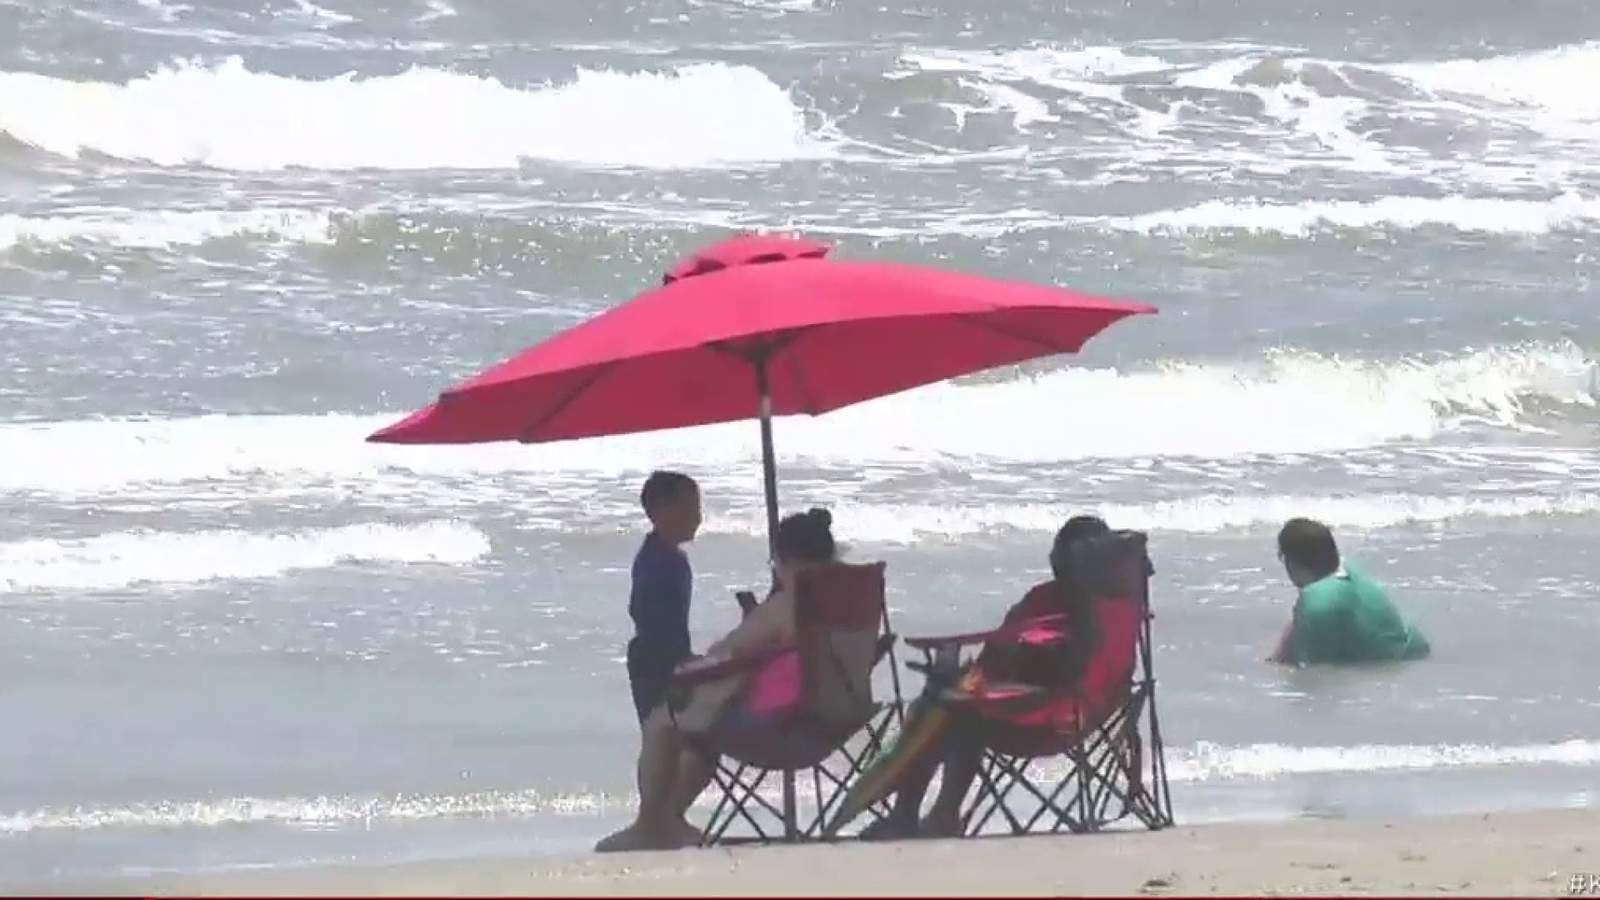 Port Aransas prepares to welcome beach-goers back for Memorial Day weekend